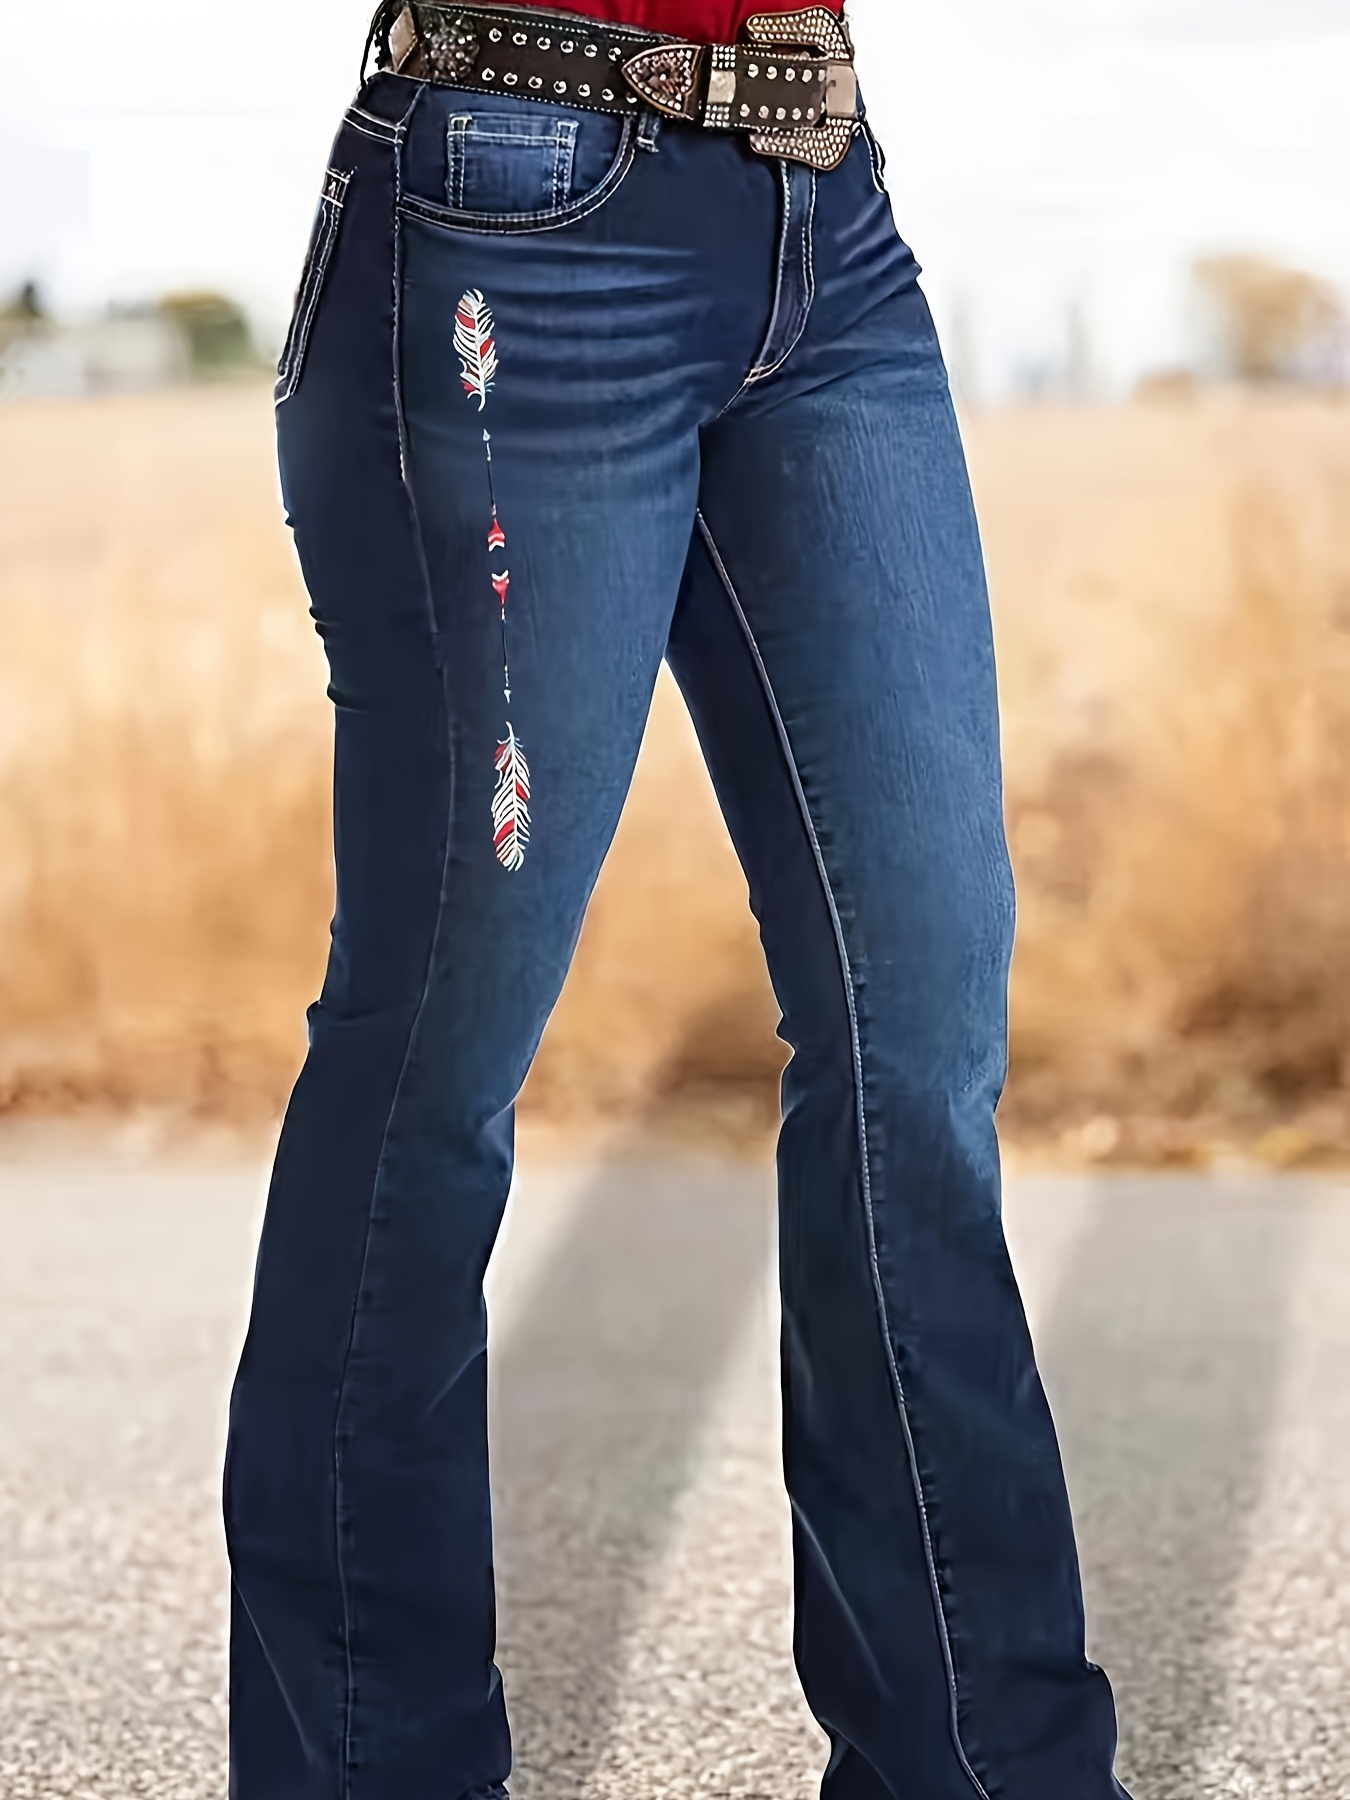 ride a cowboy  Bell bottom jeans outfit, Black bell bottoms outfit, Bell  bottoms outfit